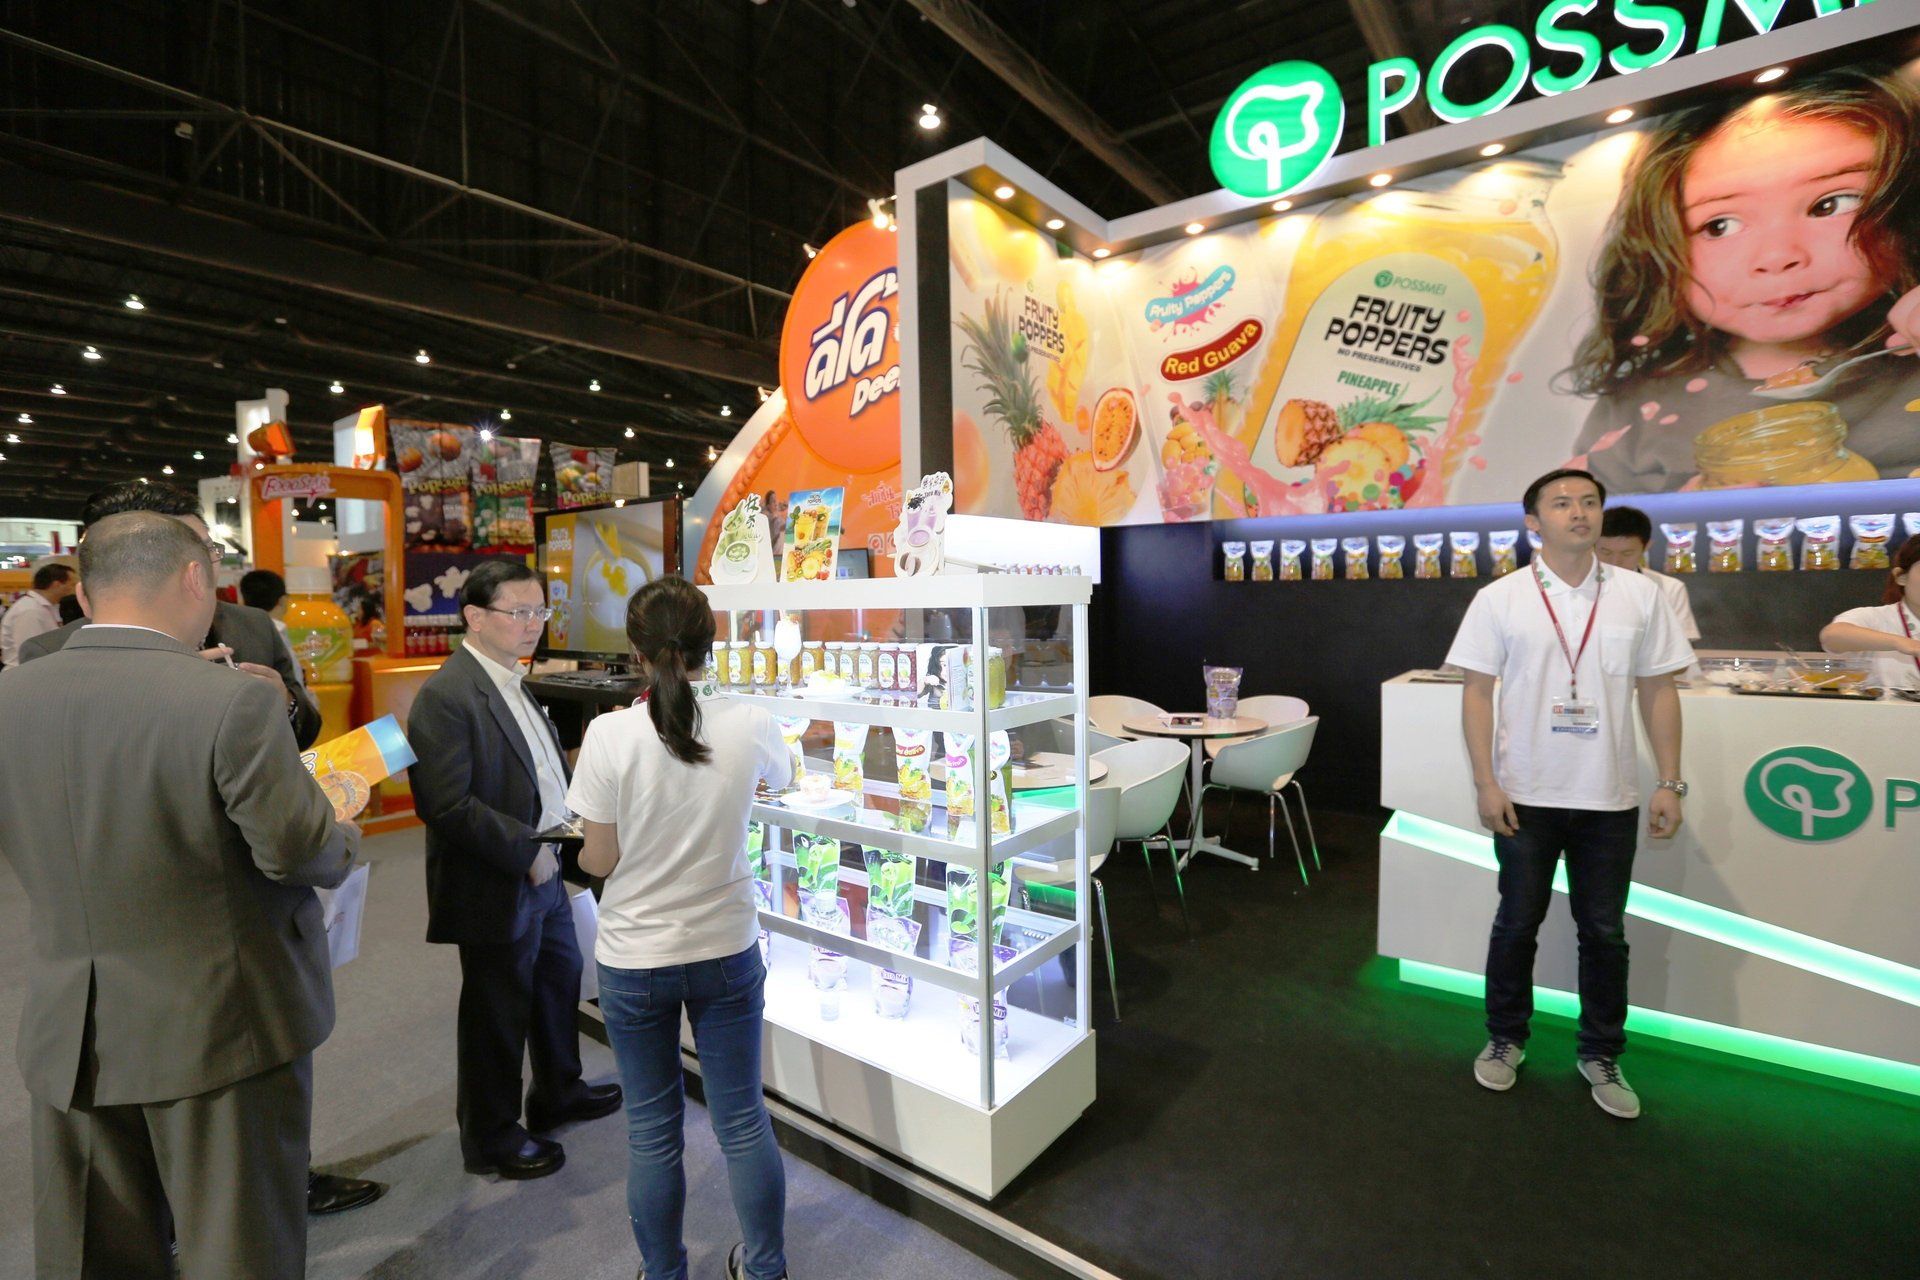 Possmei @ Thaifex 2014. Booth designed and built be Essential Global Fairs.